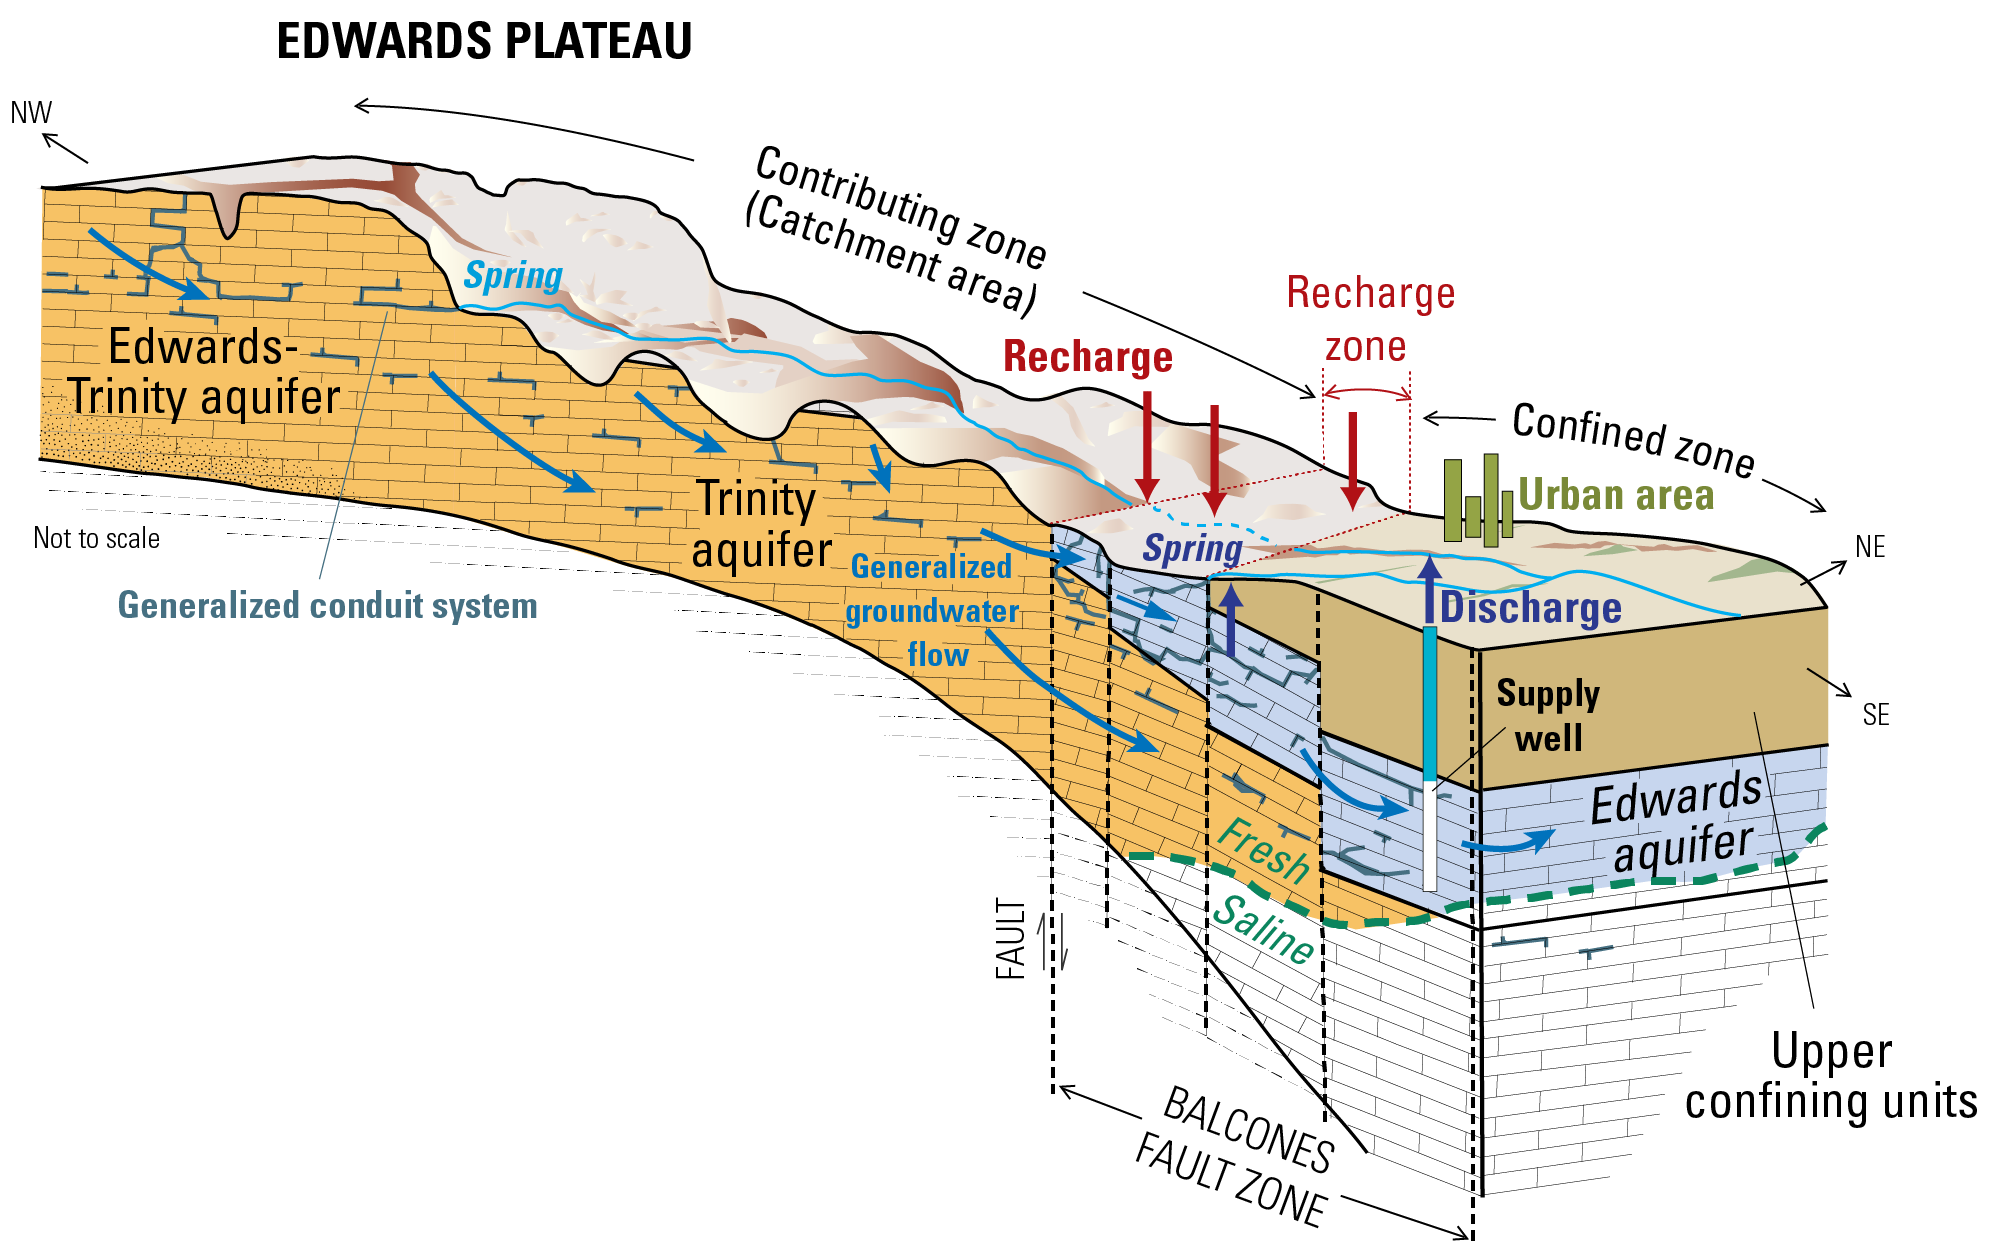 Simplified cross-section of the geologic units of the Edwards Plateau